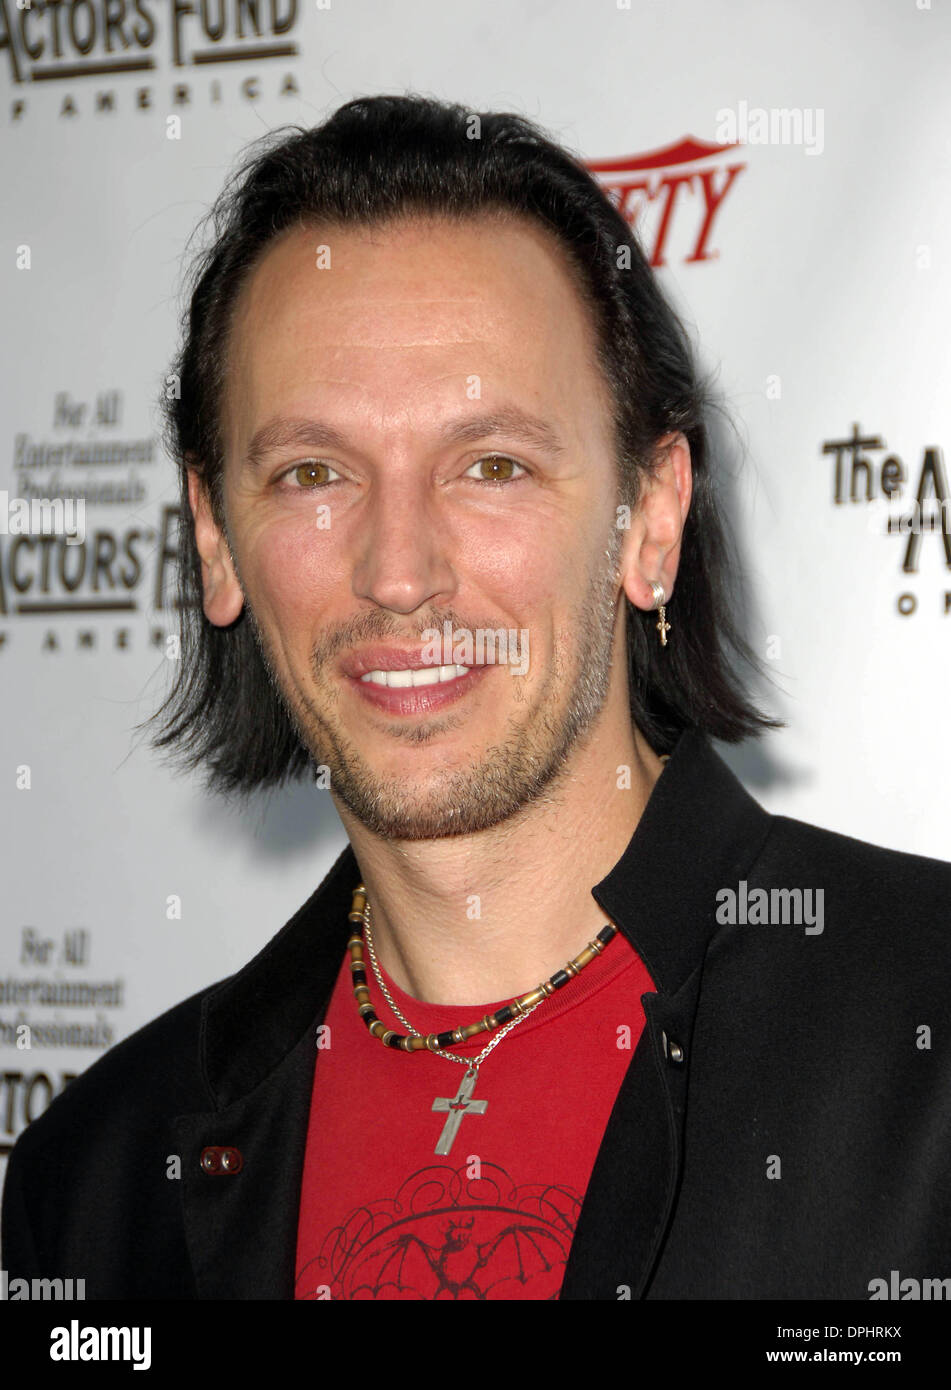 June 11, 2006 - Hollywood, California, U.S. - LOS ANGELES, CA JUNE 11, 2006 (SSI) - -.Actor Michael Valentine during the TONY Awards Party tribute to Liza Minnelli, held at the Skirball Center, on June 11, 2006, in Los Angeles.  .K48278MG.(Credit Image: © Michael Germana/Globe Photos/ZUMAPRESS.com) Stock Photo